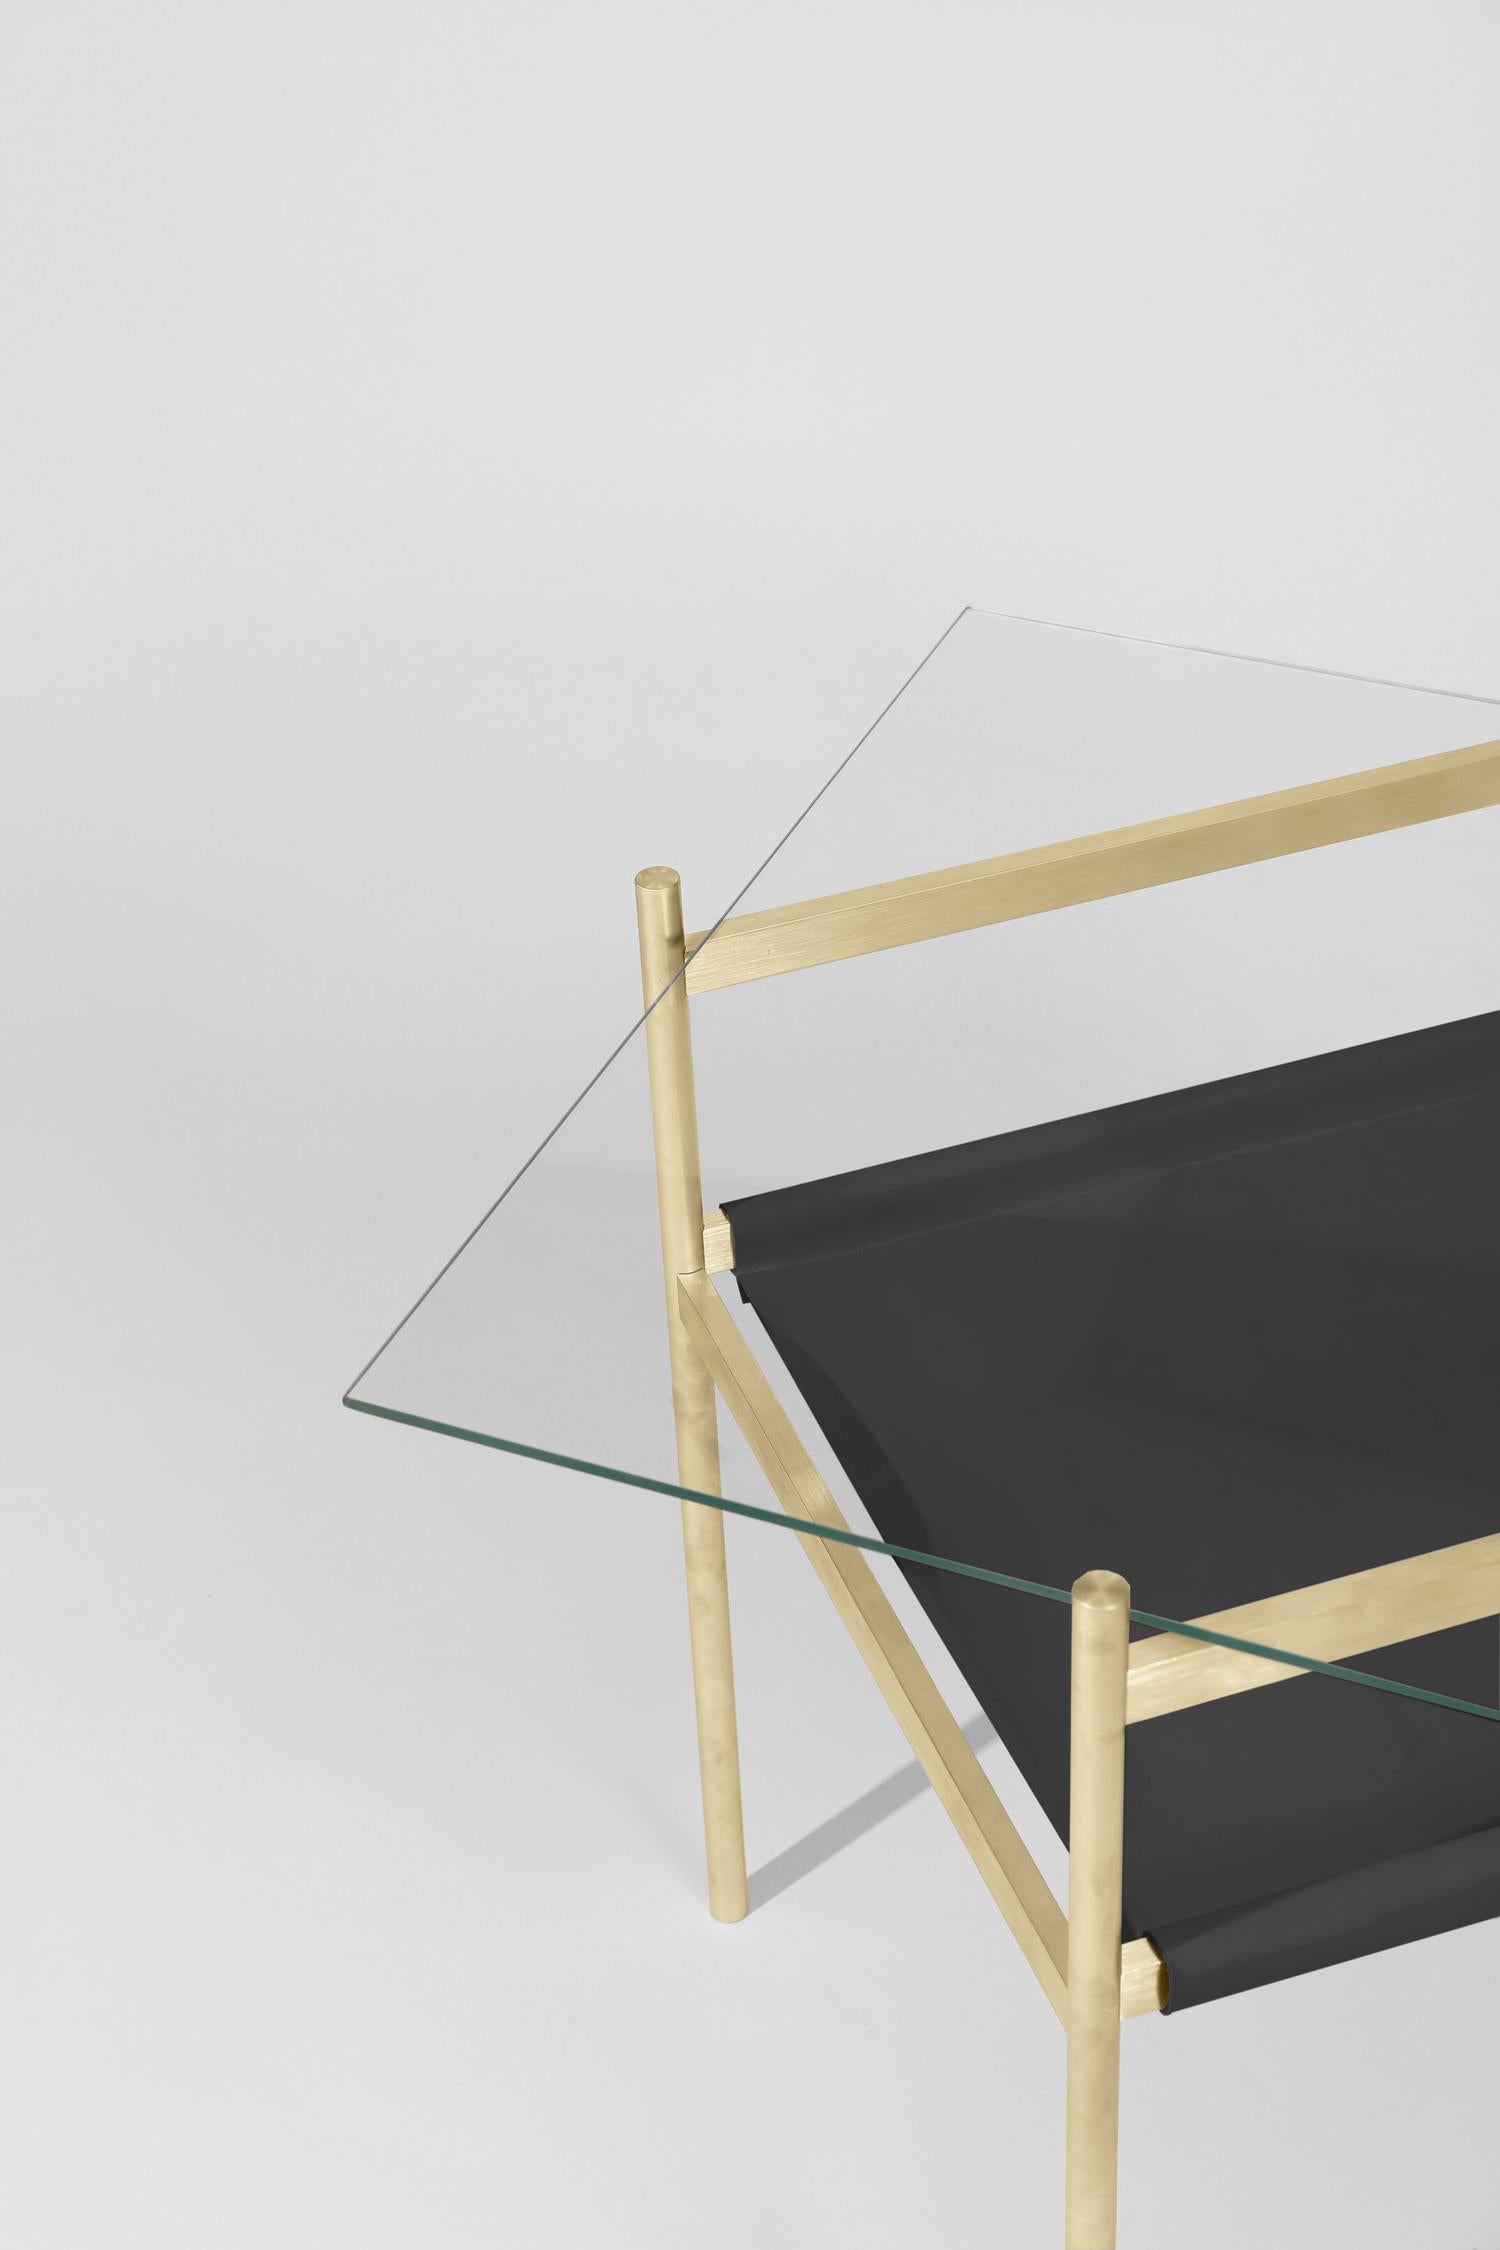 Made to order. Please allow six weeks for production.

Brass Frame / Clear Glass / Black Leather Sling

The Duotone Furniture series is based on a modular hardware system that pairs sturdy construction with visual lightness and a range of